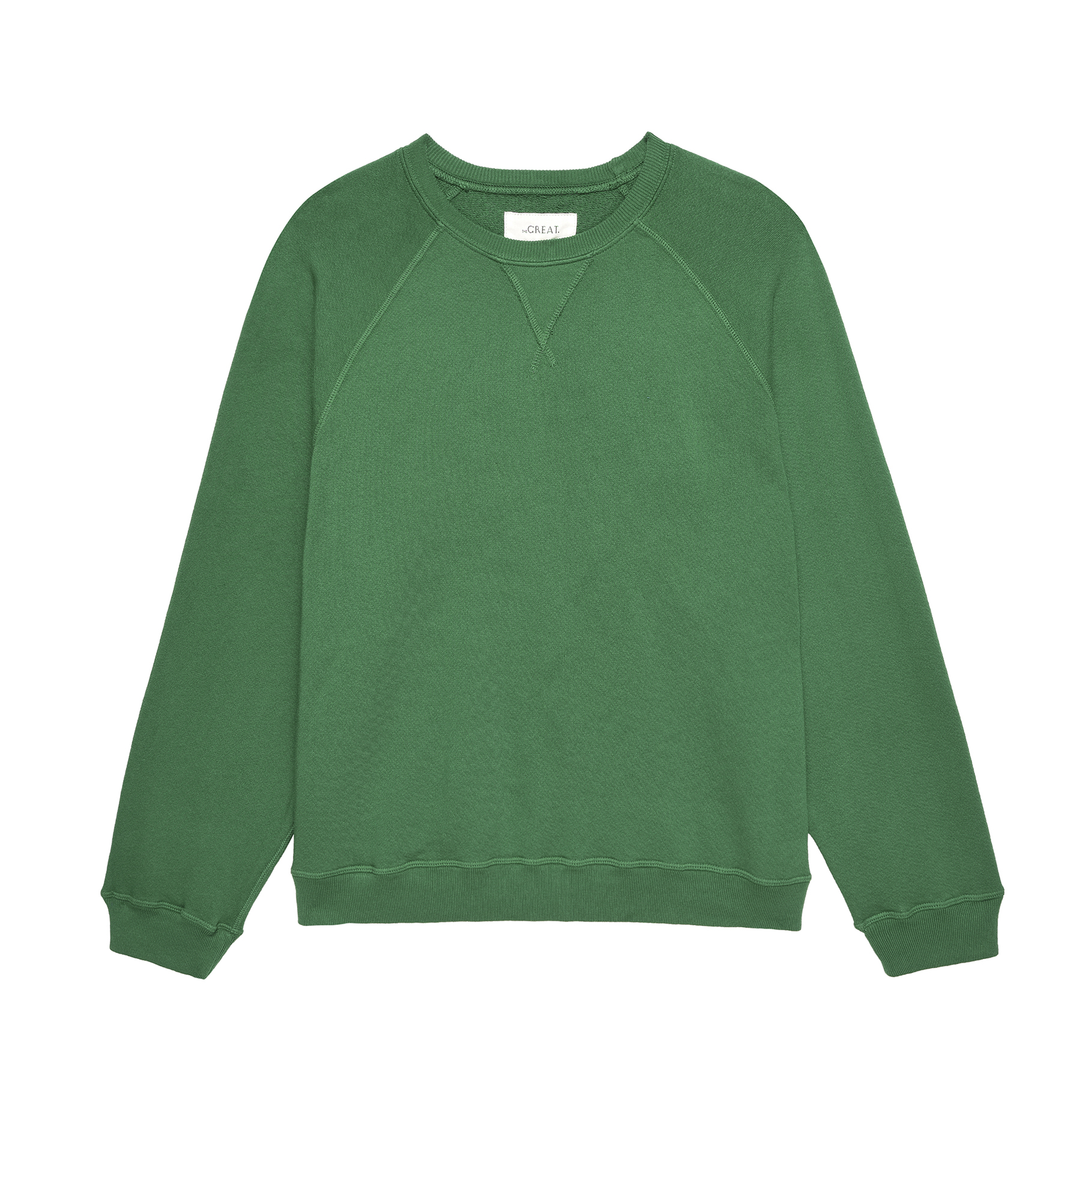 The Great - The Slouch Sweatshirt in Holly Leaf